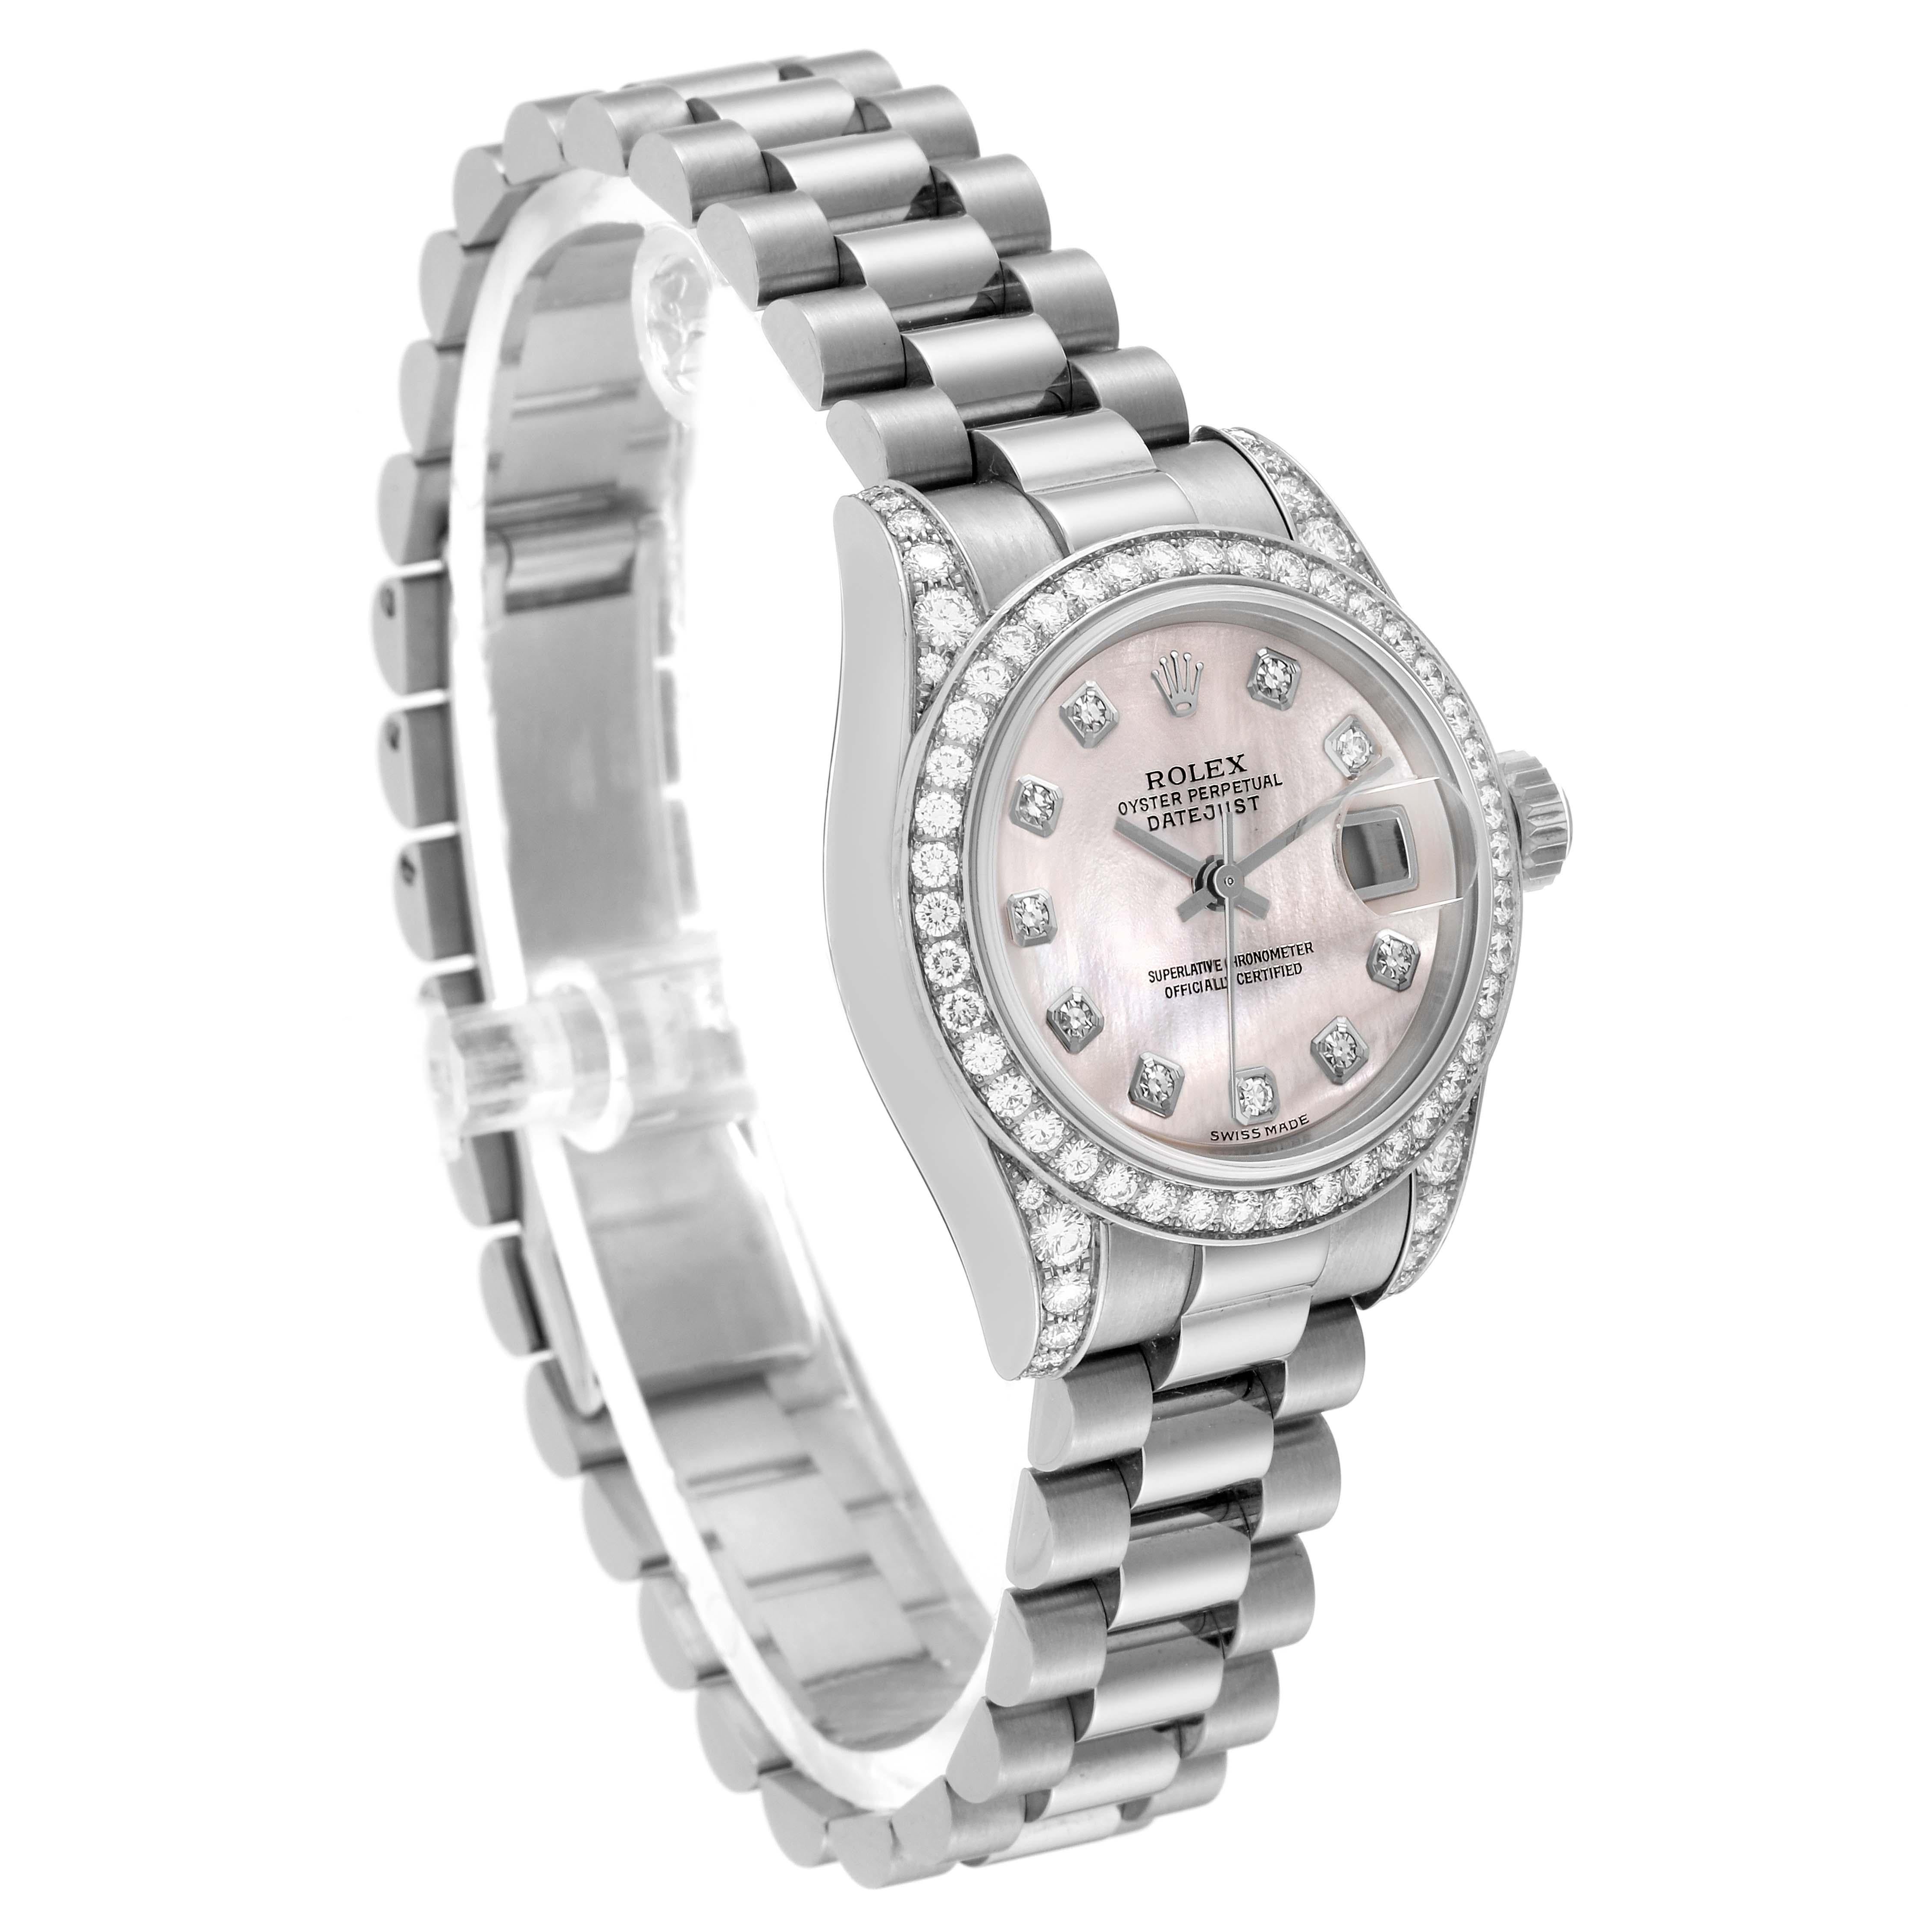 Rolex Datejust President White Gold Mother of Pearl Dial Diamond Watch 179159 For Sale 6